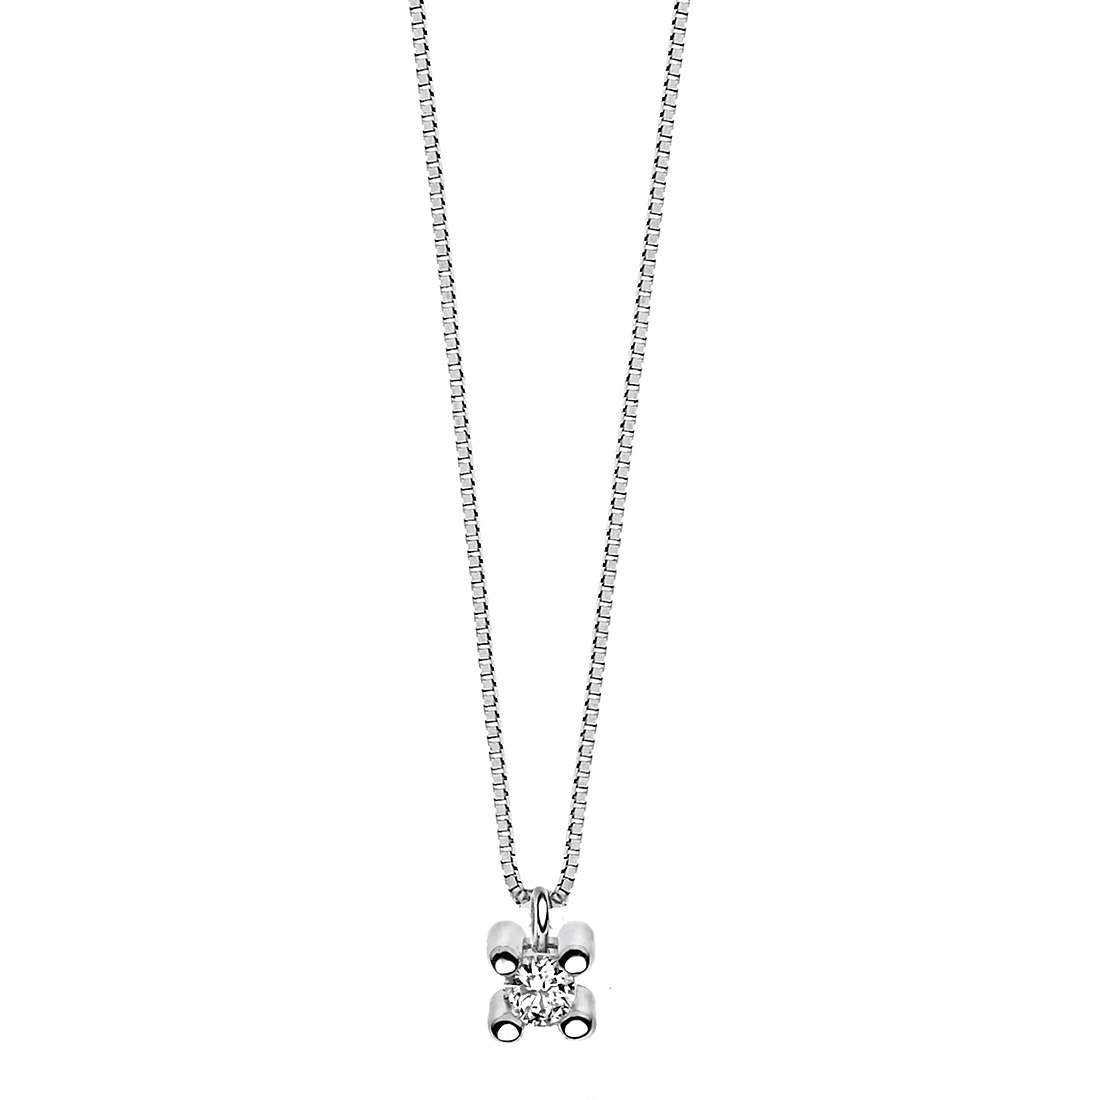 collier Point Lumineux Comete Or 18 kt GLB 1406